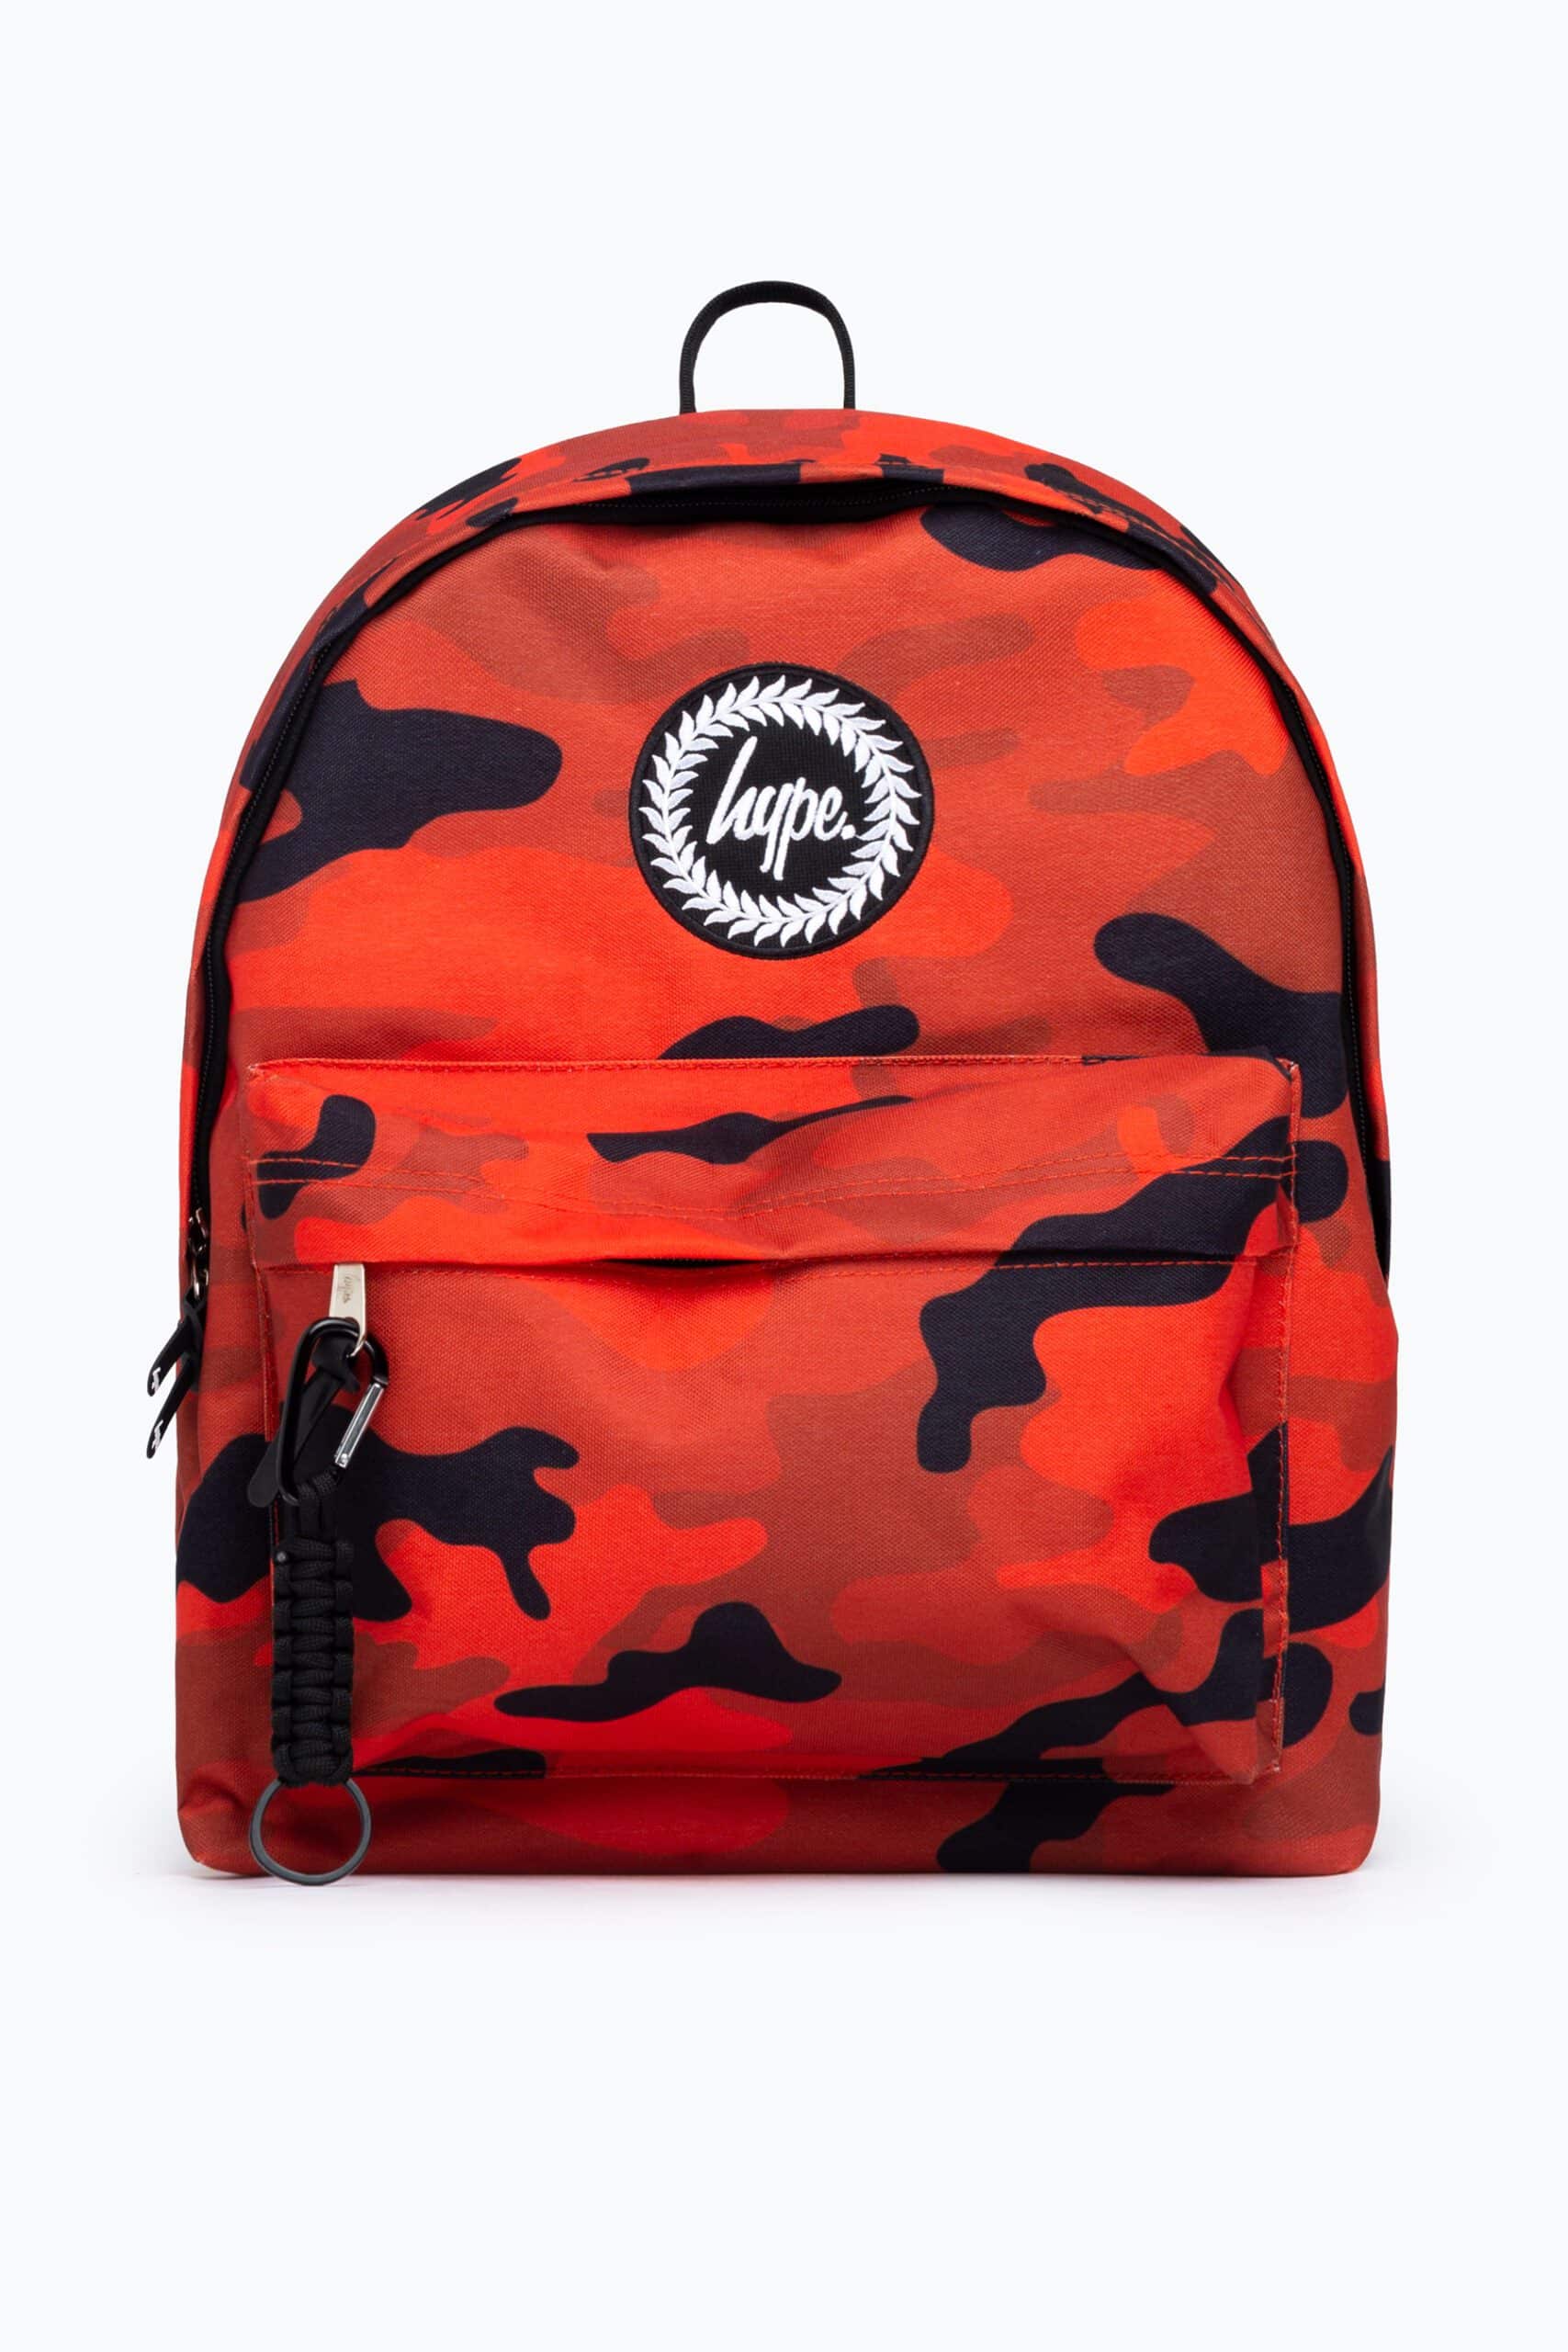 hype red camo backpack front view